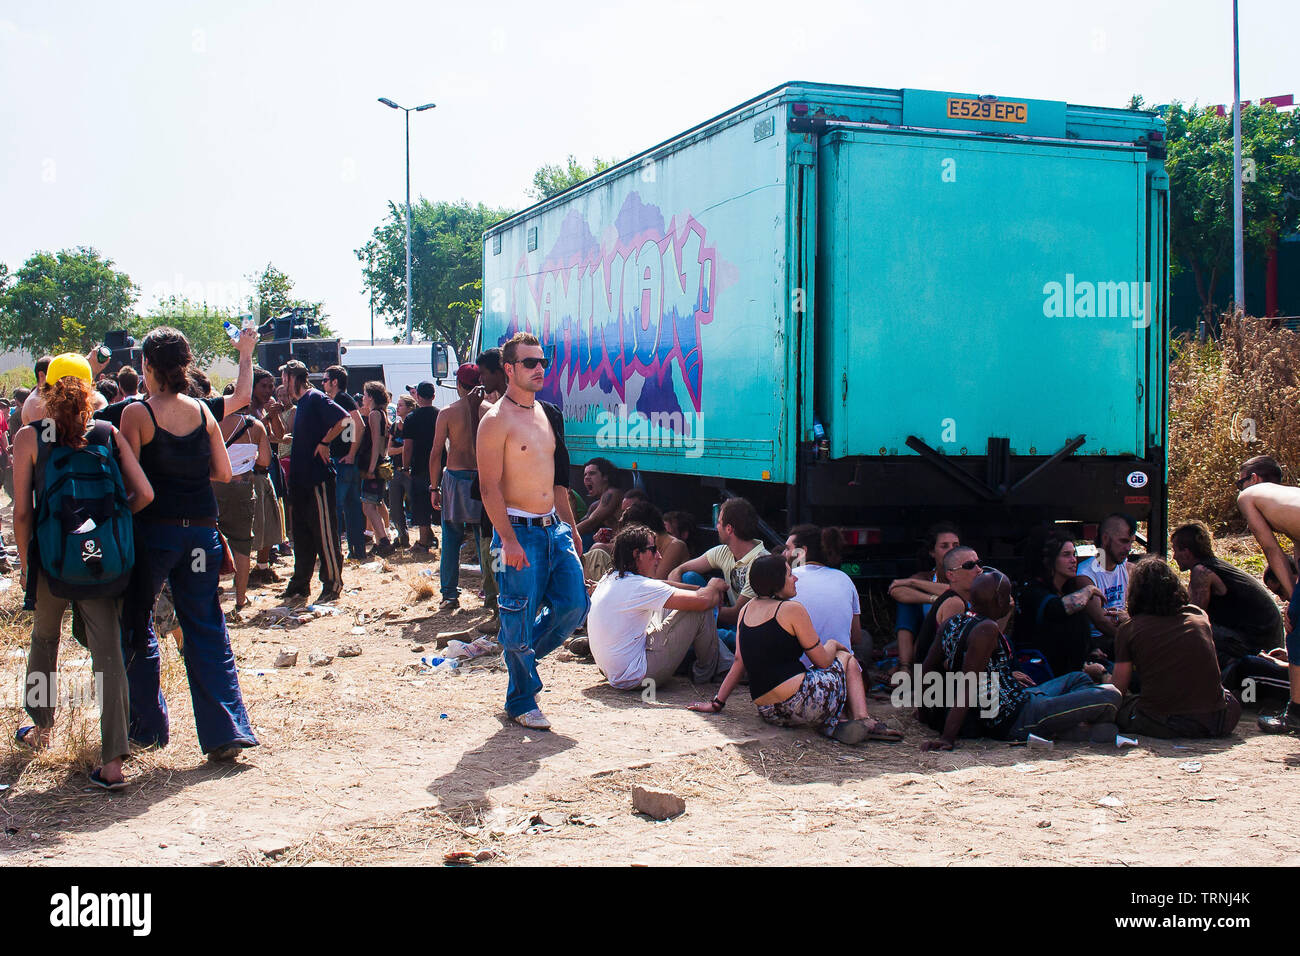 Festival goers chilling out in the shade of a truck at Anti-Sonar free illegal squat party rave outside Sonar Festival, Barcelona, Spain Stock Photo